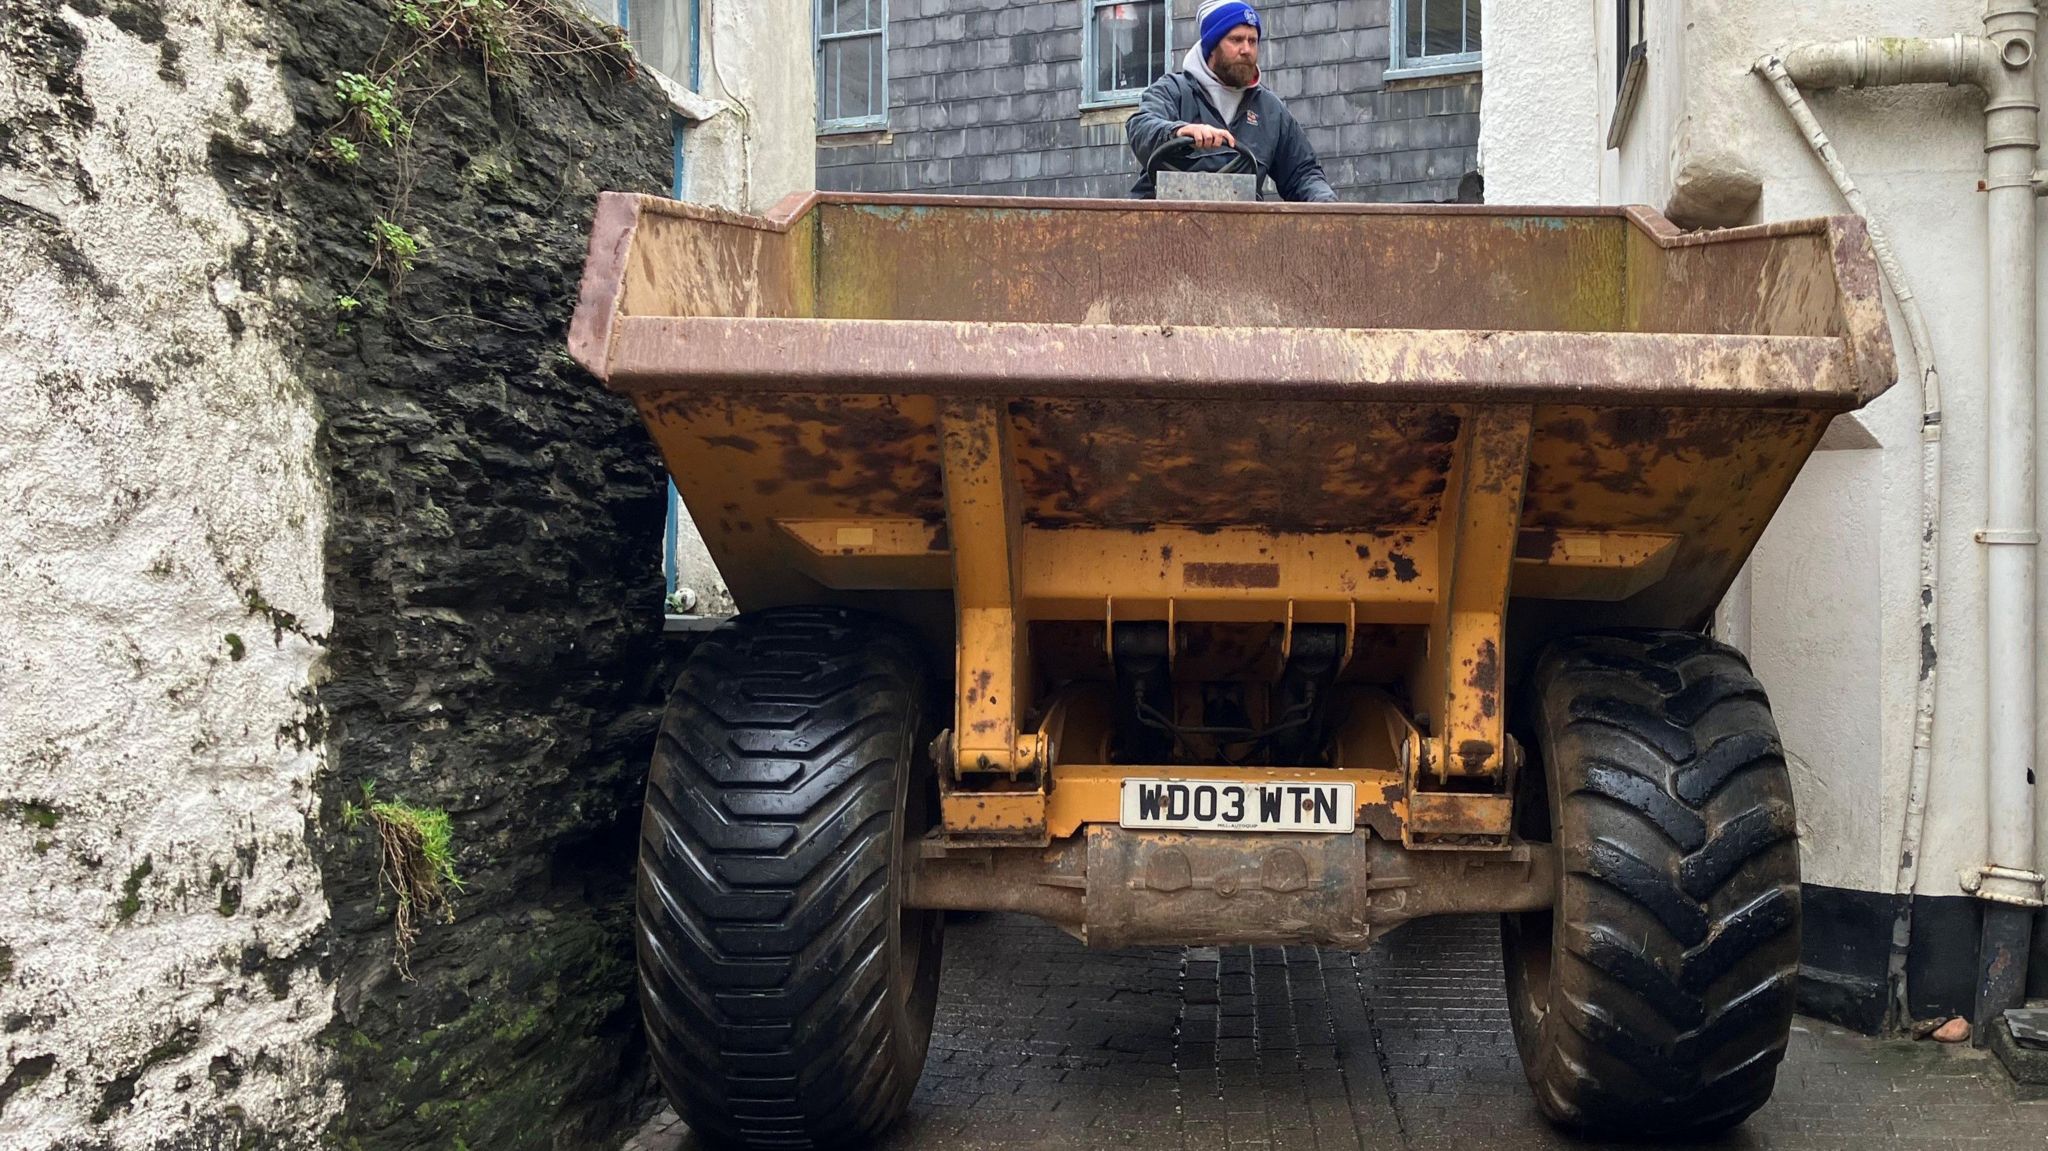 Dumper being squeezed down Port Isaac street